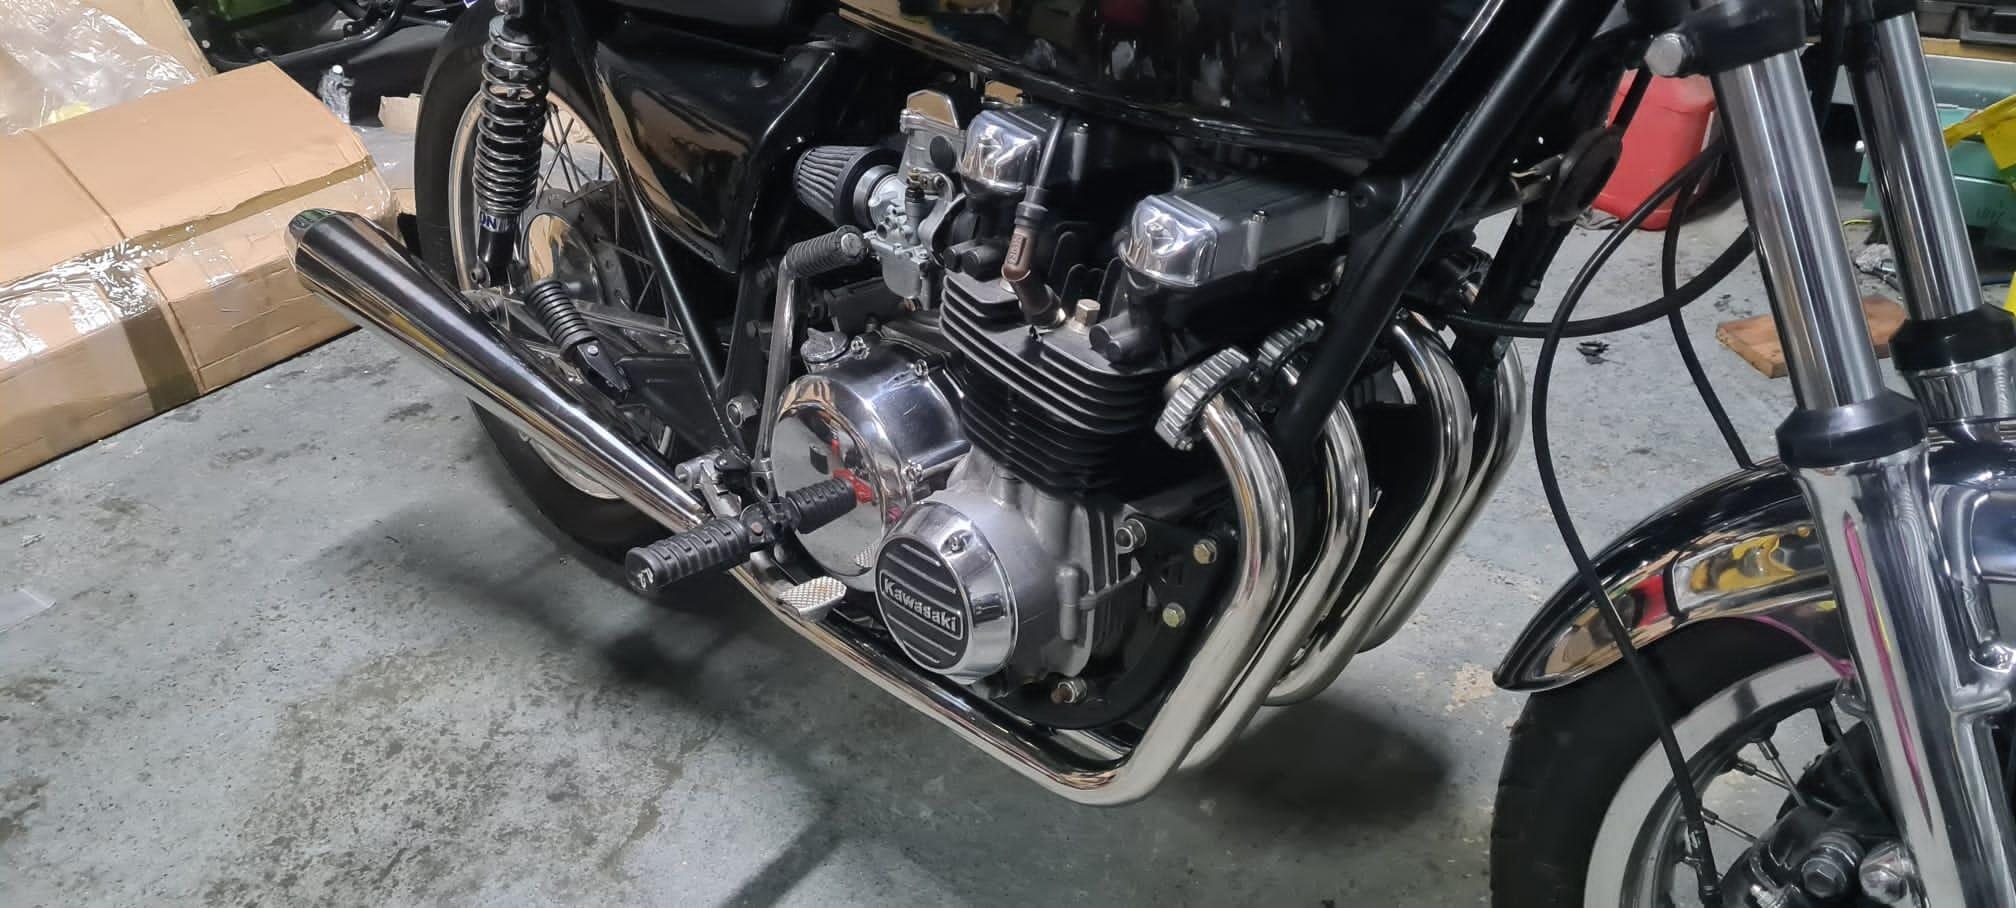 Z650 REPLICA 4 INTO 2 EXHAUST SYSTEM (STAINLESS)